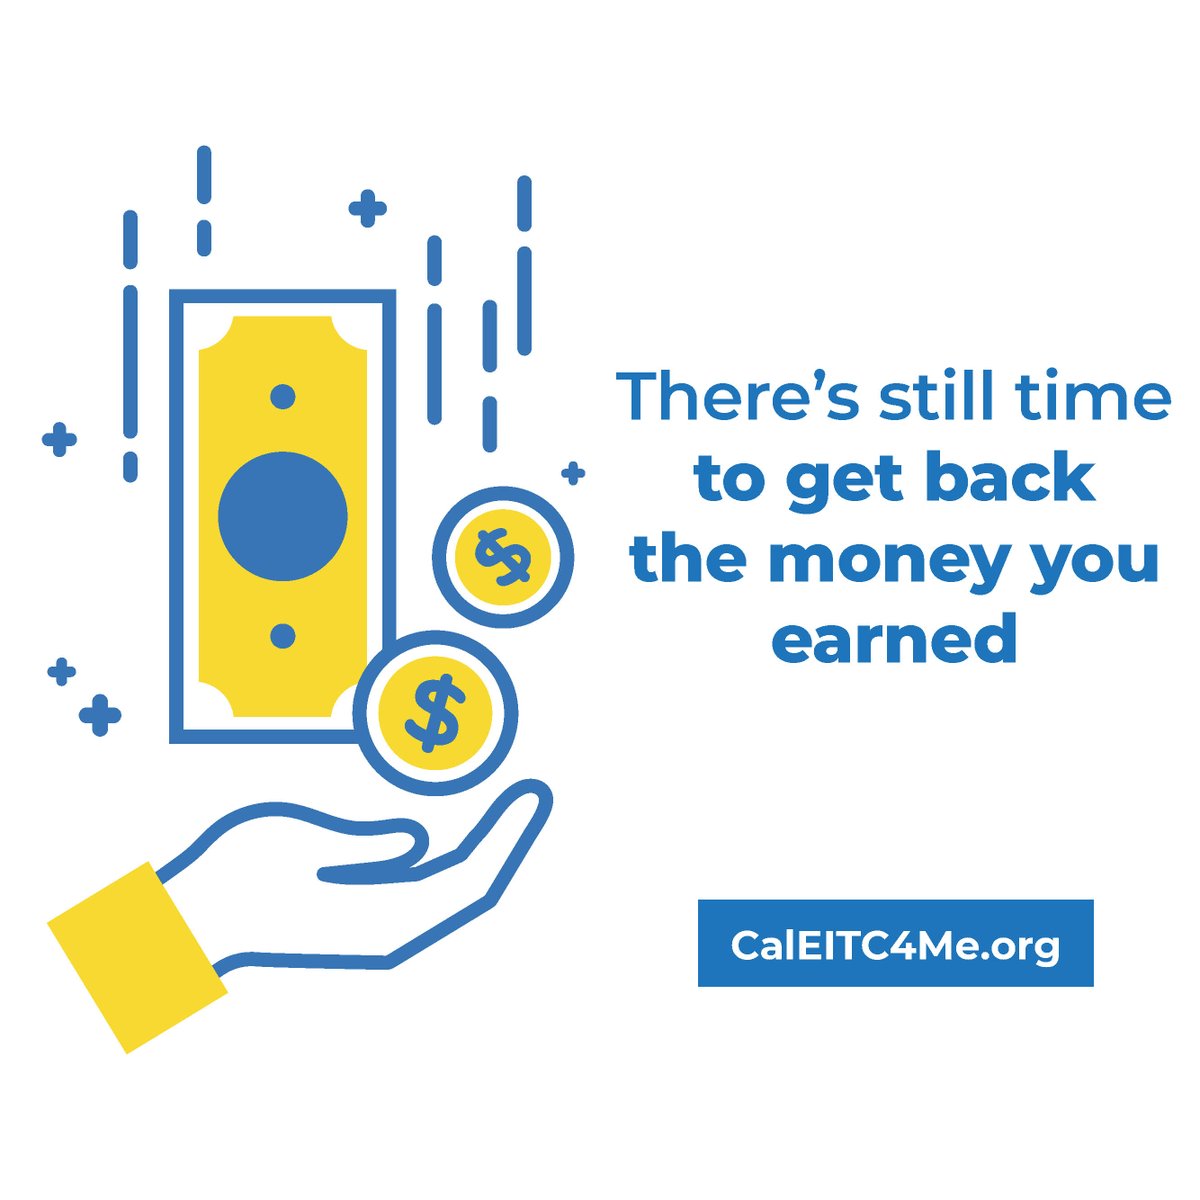 There’s still time to get back the money you earned. You still have 5 days until #TaxDay on April 15. Find free, IRS-trained tax prep at CalEITC4Me.org/fileyourtaxes